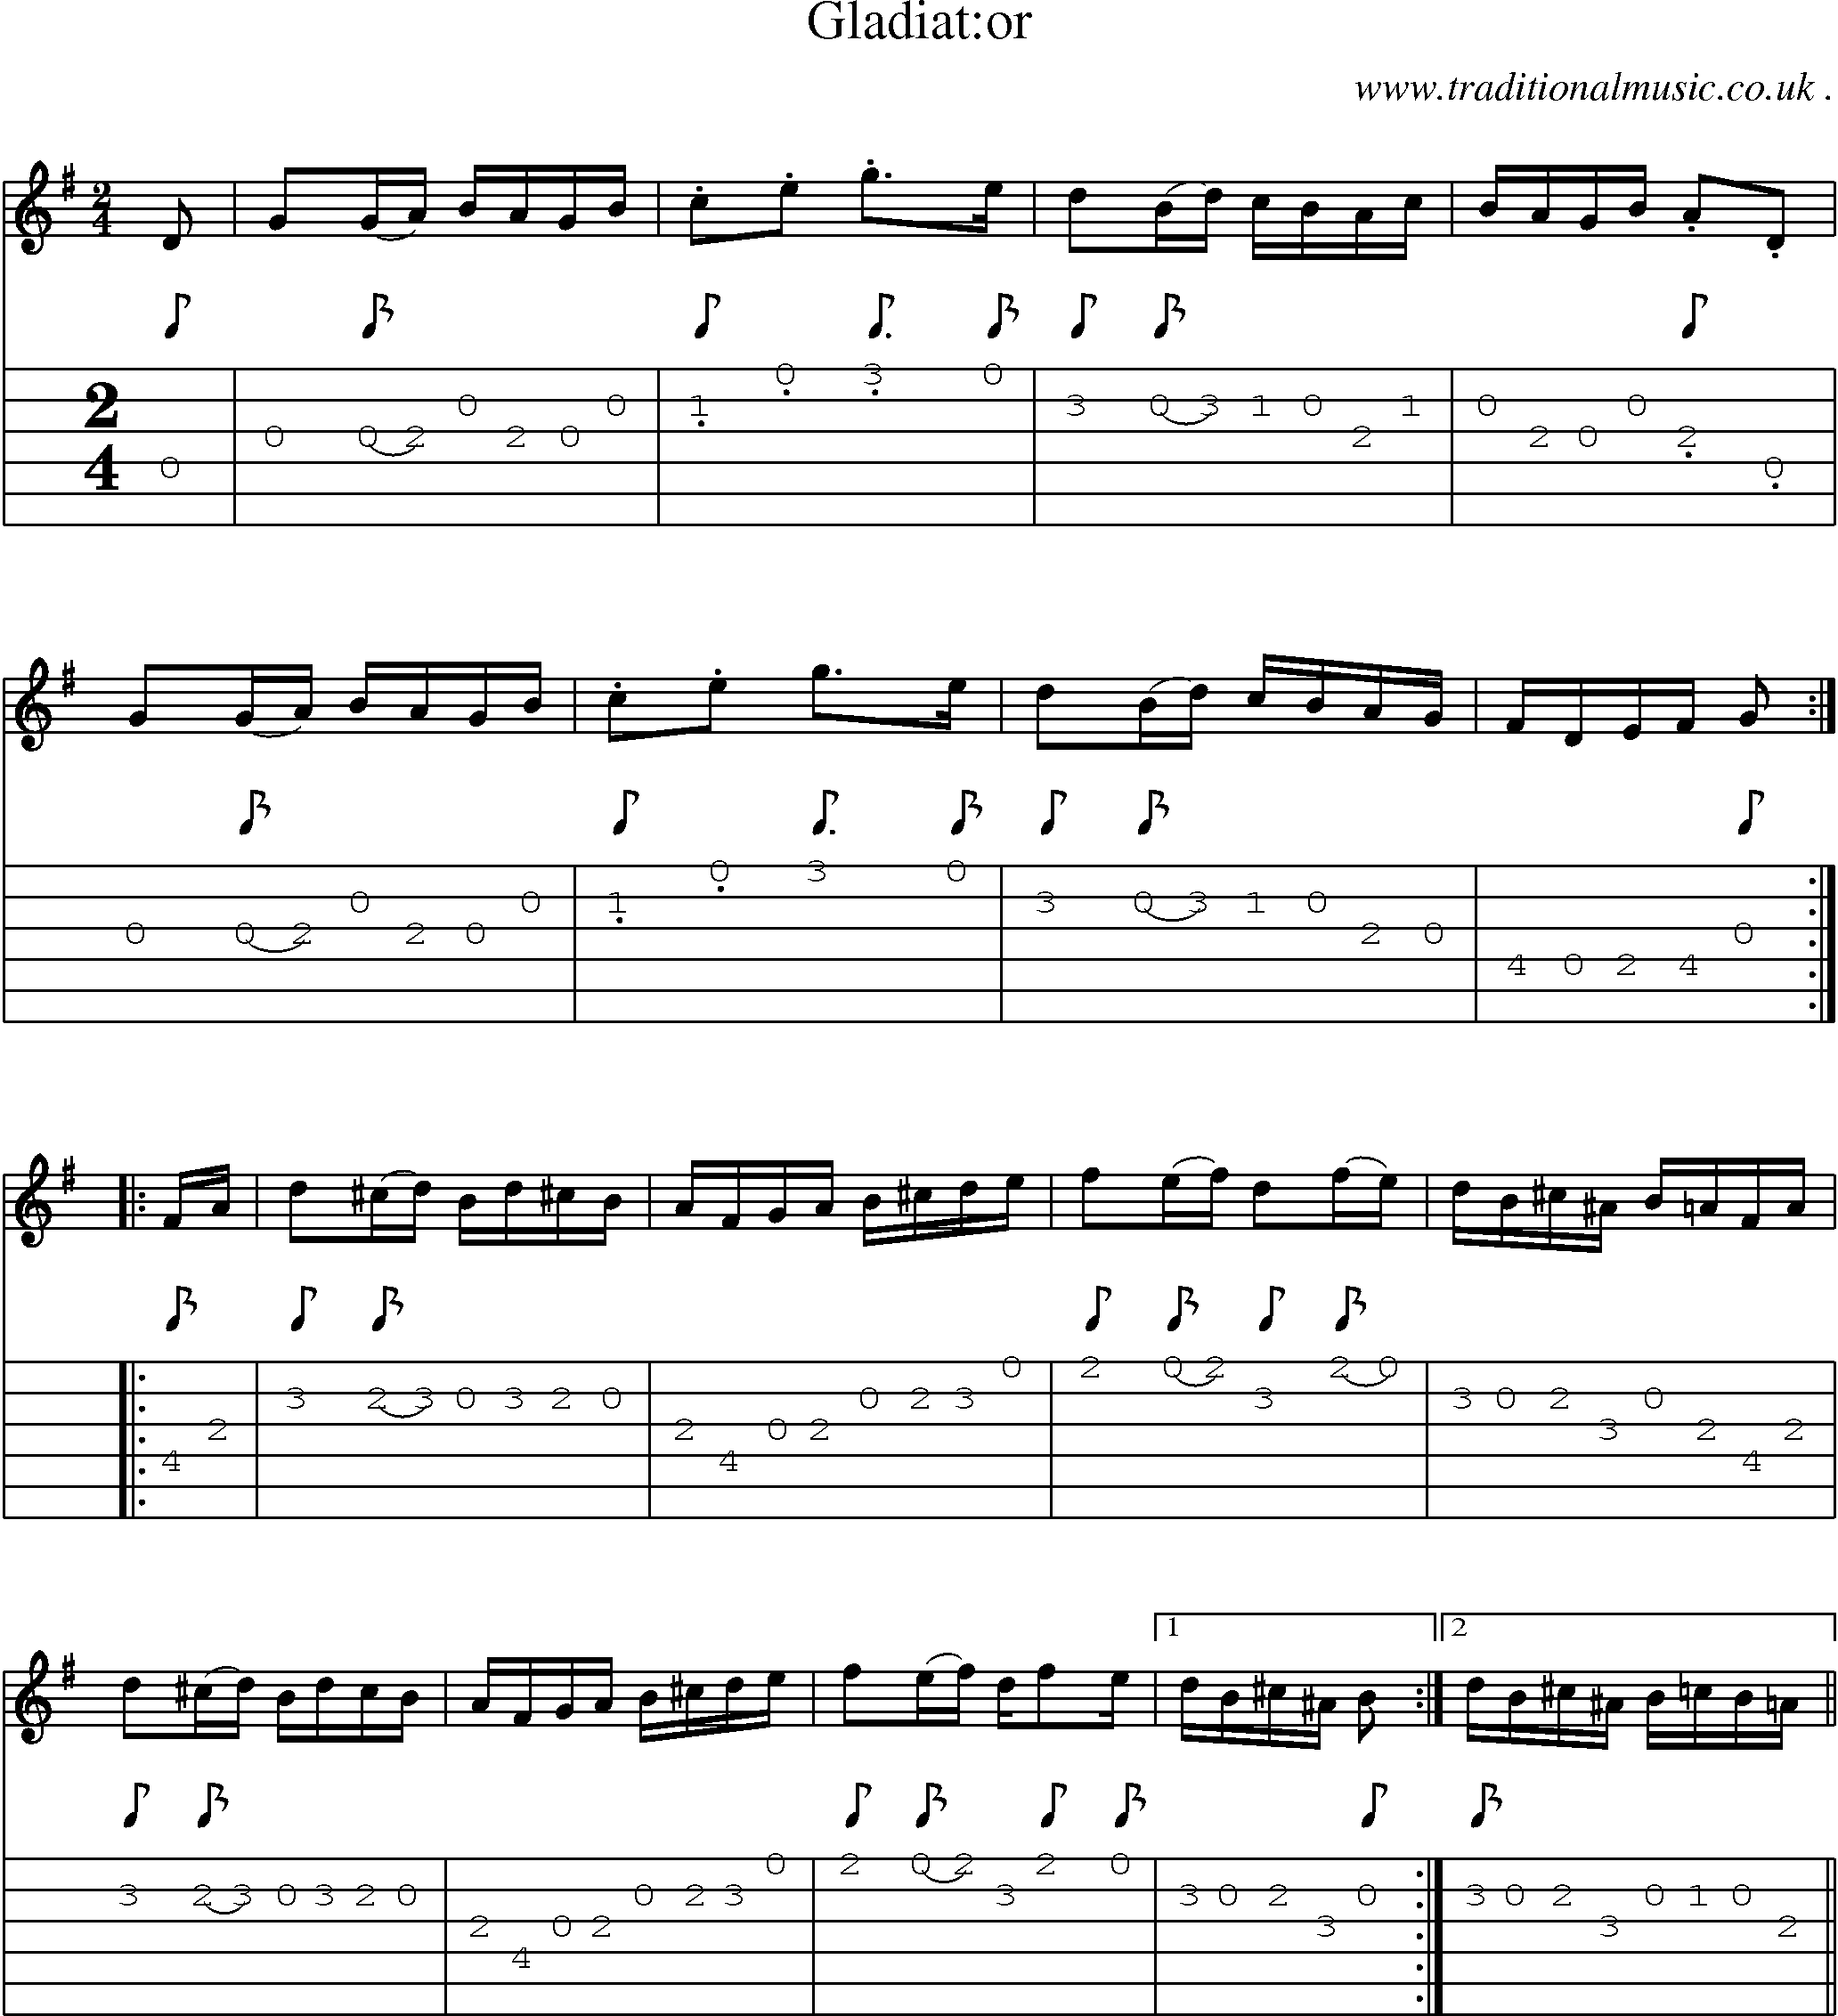 Sheet-Music and Guitar Tabs for Gladiator